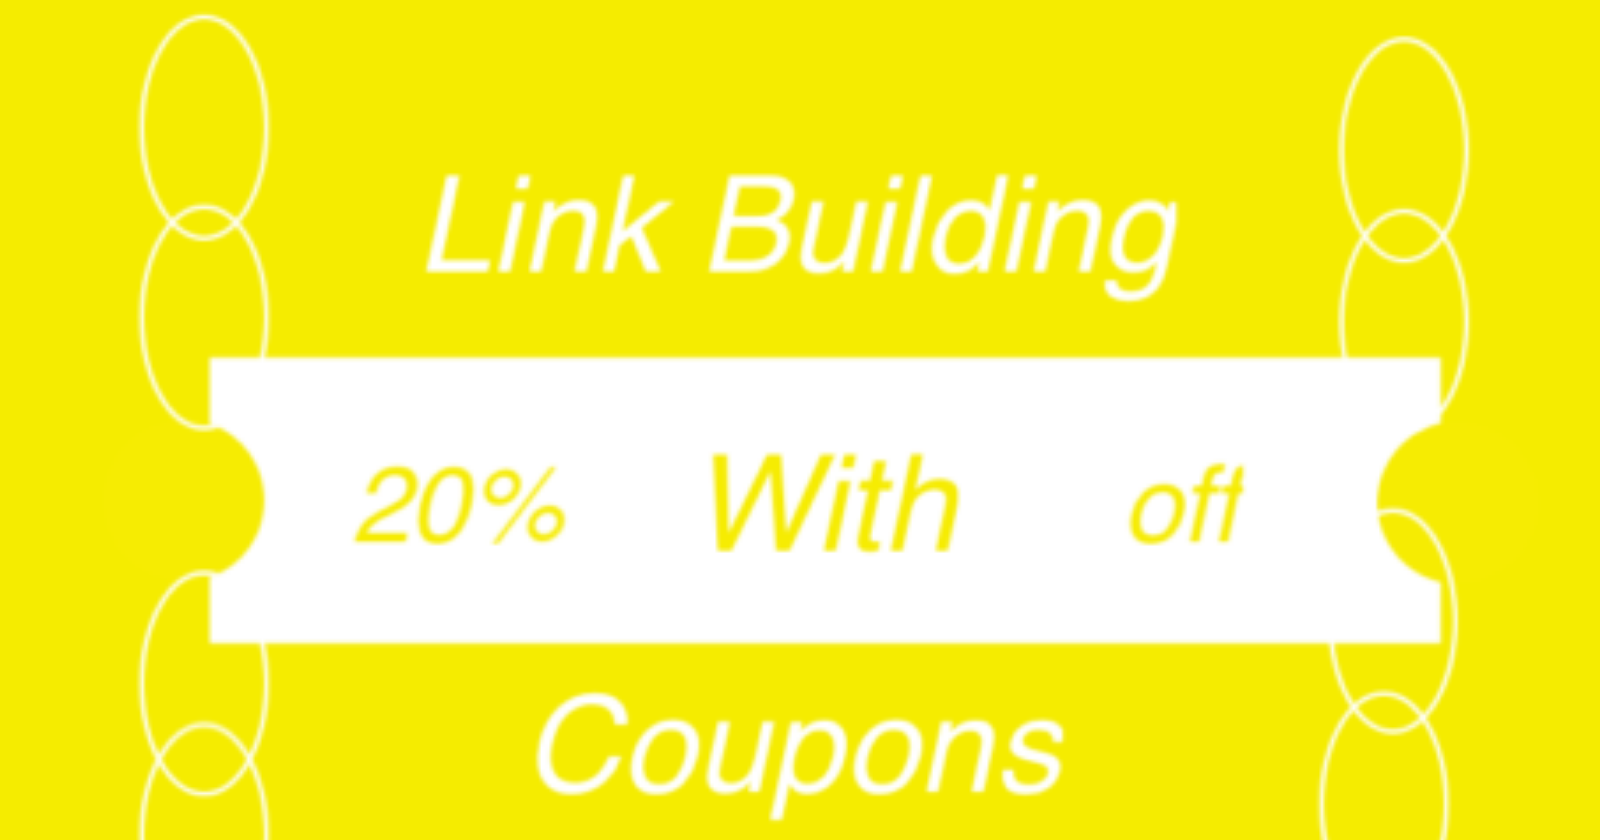 Coupon Link Building for Ecommerce: A Step-by-Step Guide